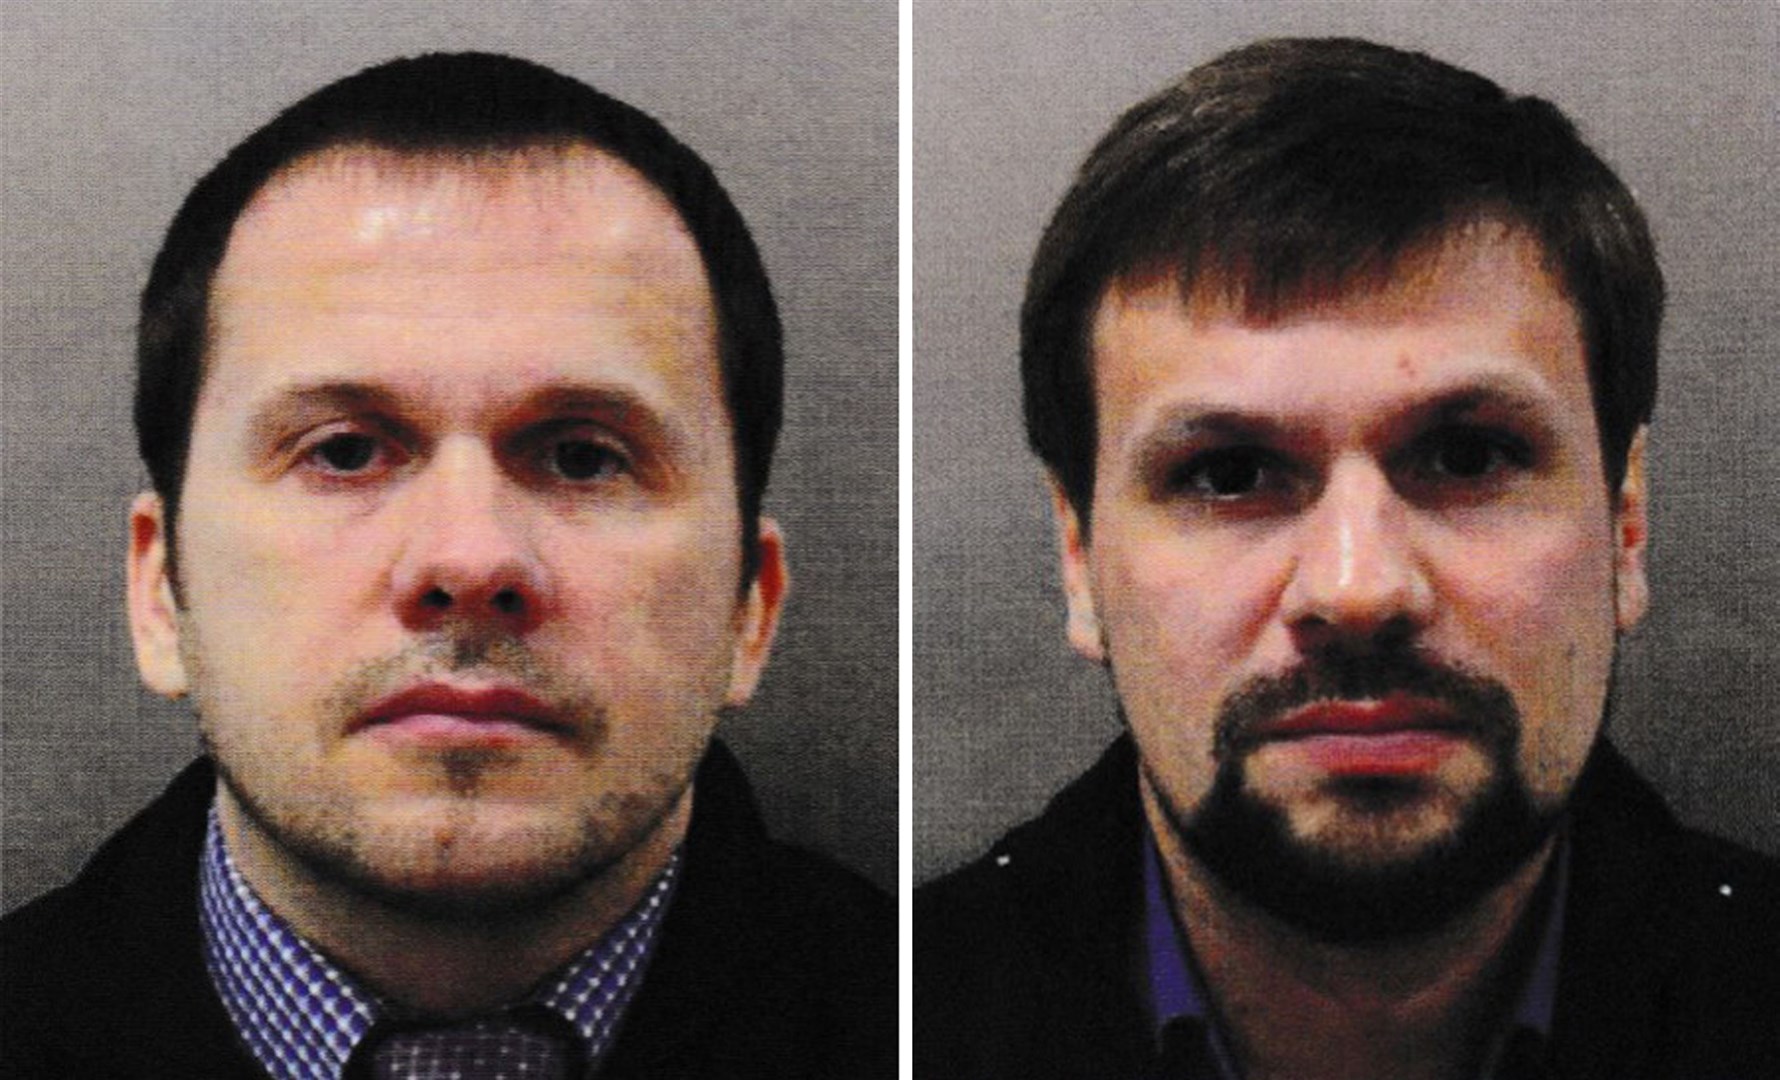 Alexander Petrov, left, and Ruslan Boshirov, who were named as suspects by police in 2018 (Metropolitan Police/PA)